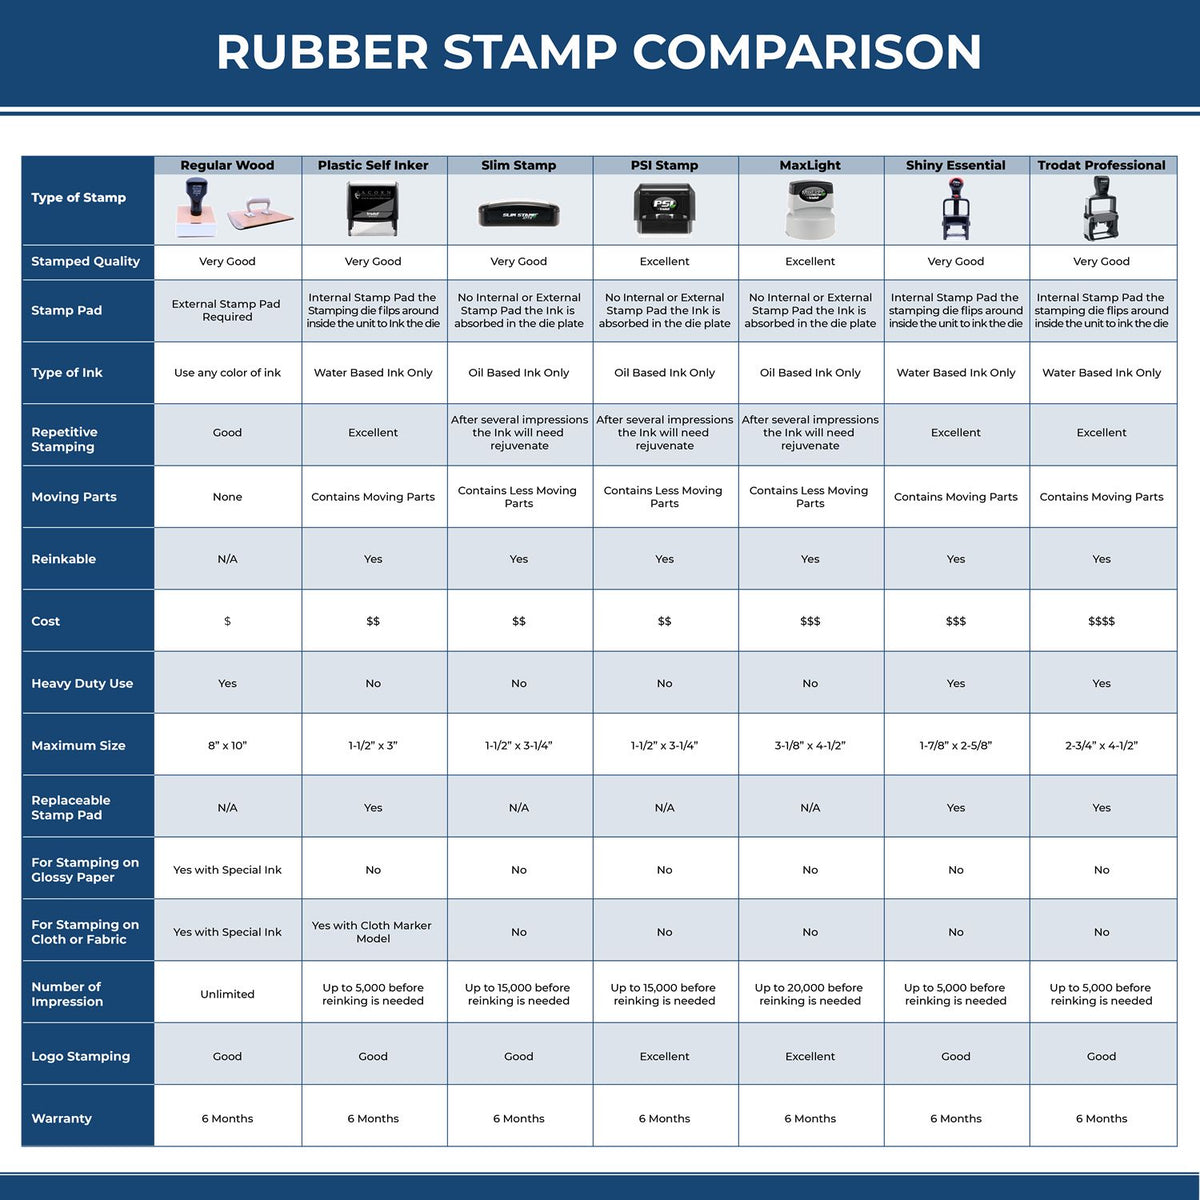 Large Insufficient Address Rubber Stamp 4965R Rubber Stamp Comparison